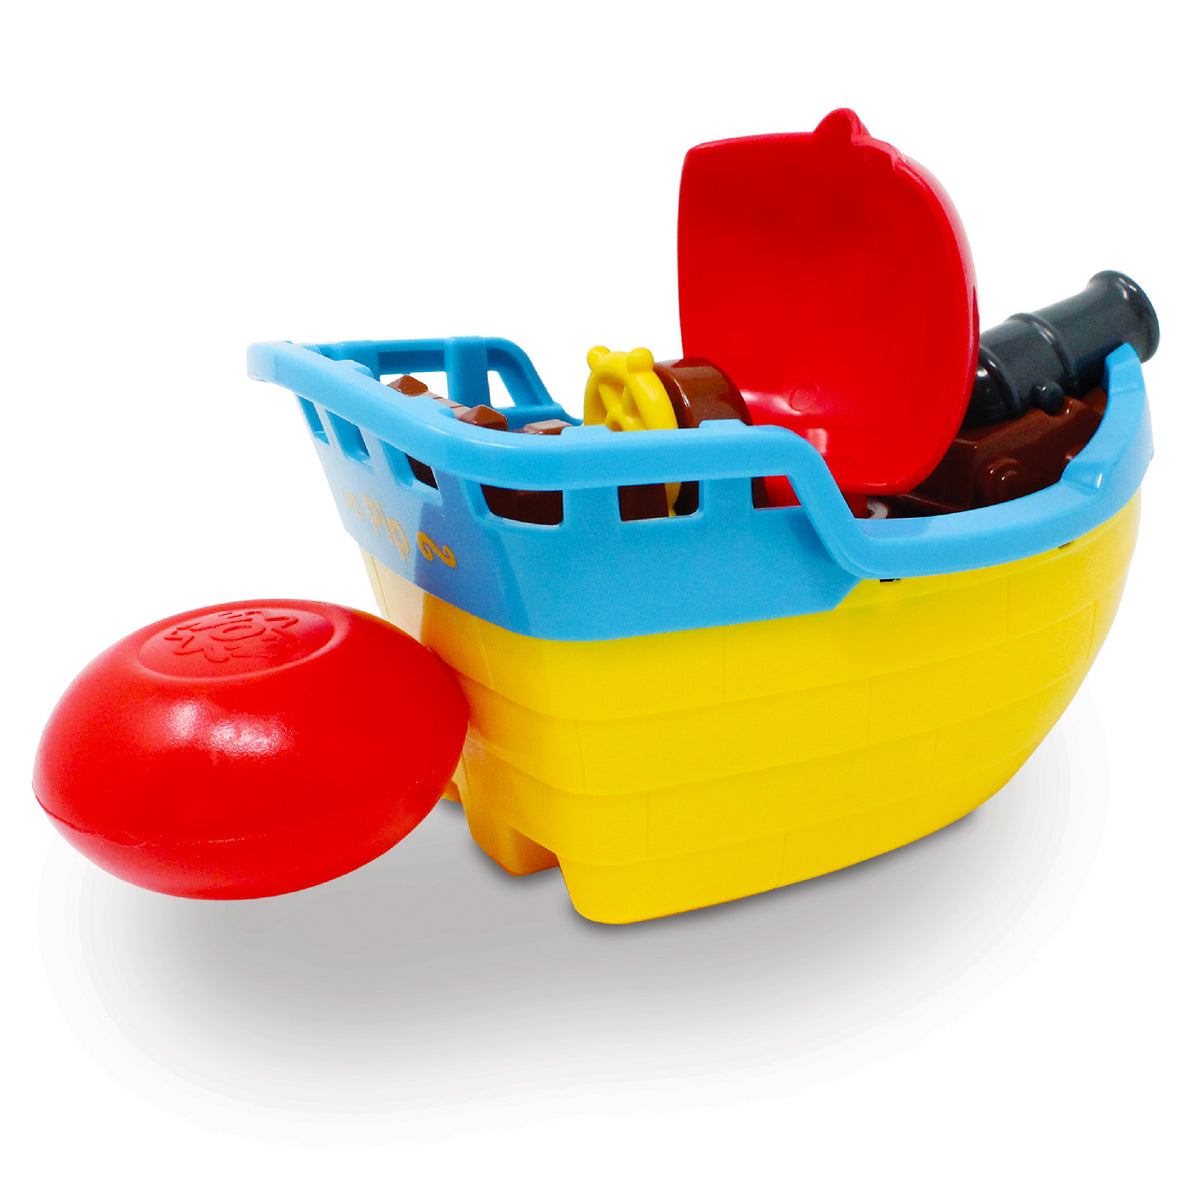 WOW Toys Pip the Pirate Ship (Bath Toy)